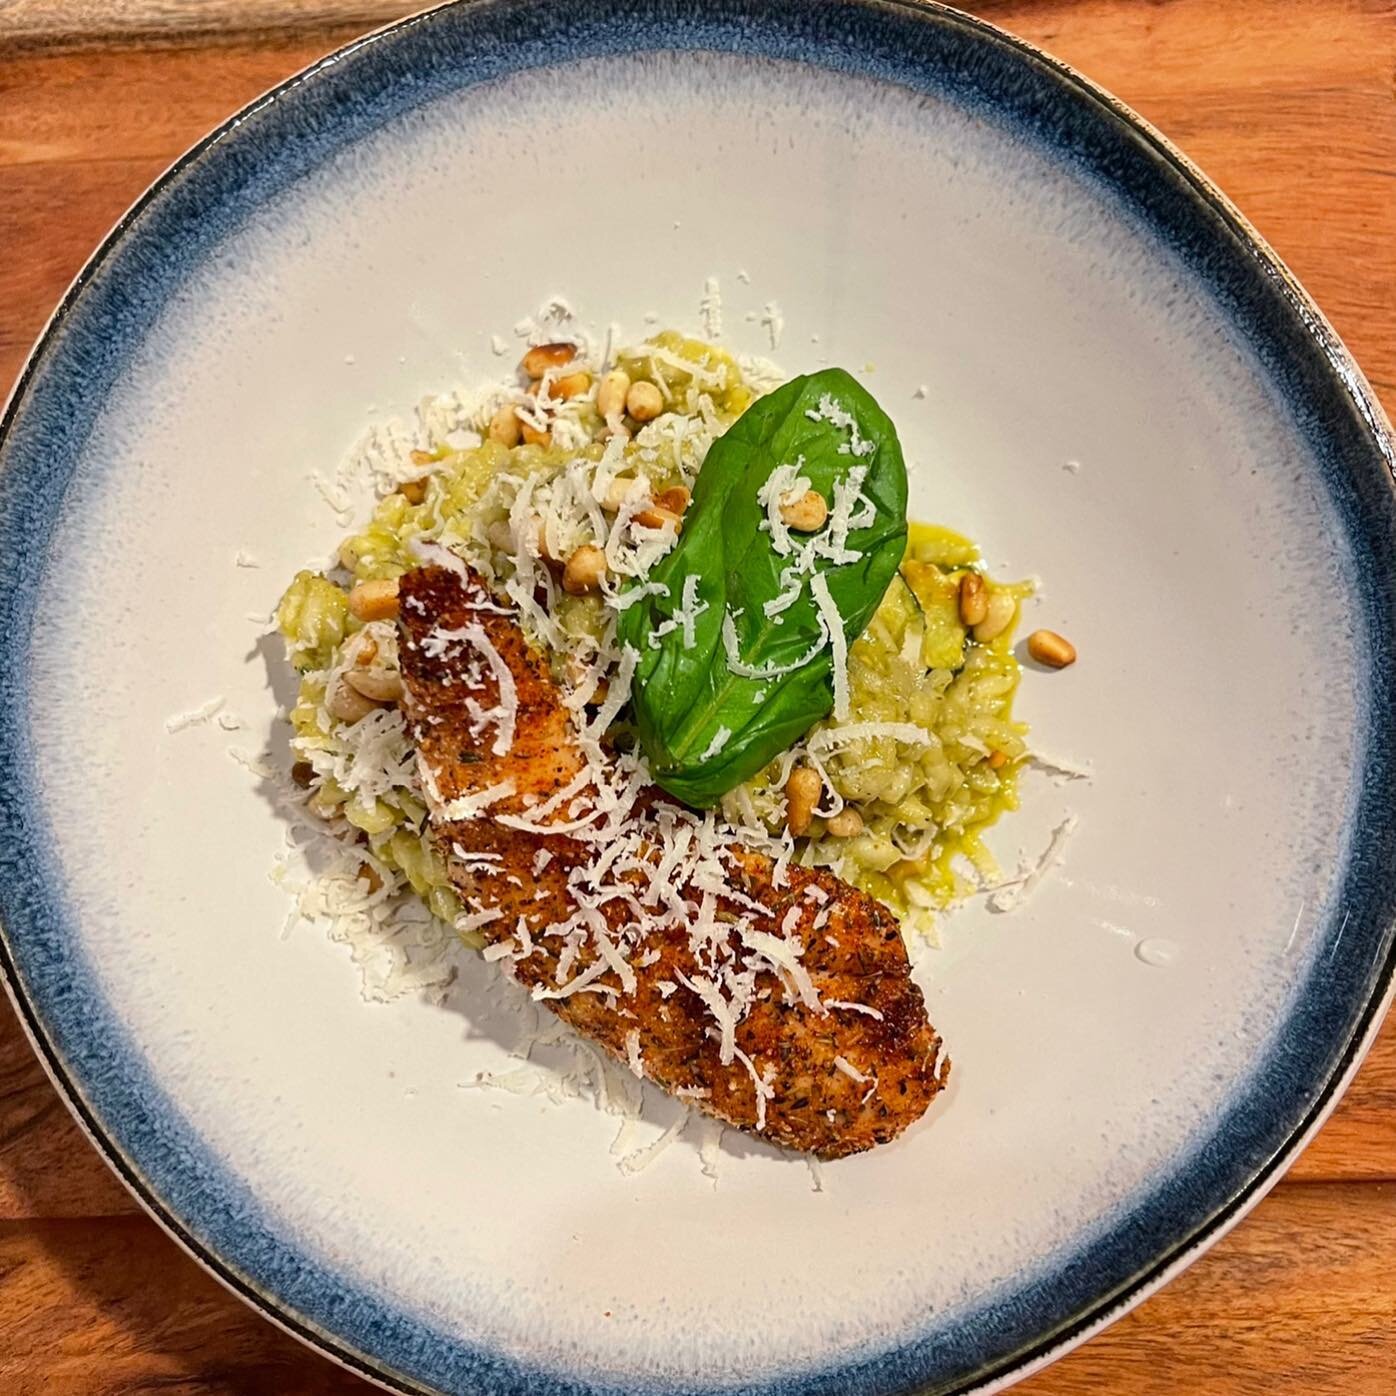 Pesto Goat Cheese Risotto With Blackened Chicken &amp; Zucchini 🤩🤩🤩 this risotto is bright and tangy and pairs so well with a bit of heat from the blackened chicken. Risotto may take a long time to cook but it is not complicated! And it is well wo